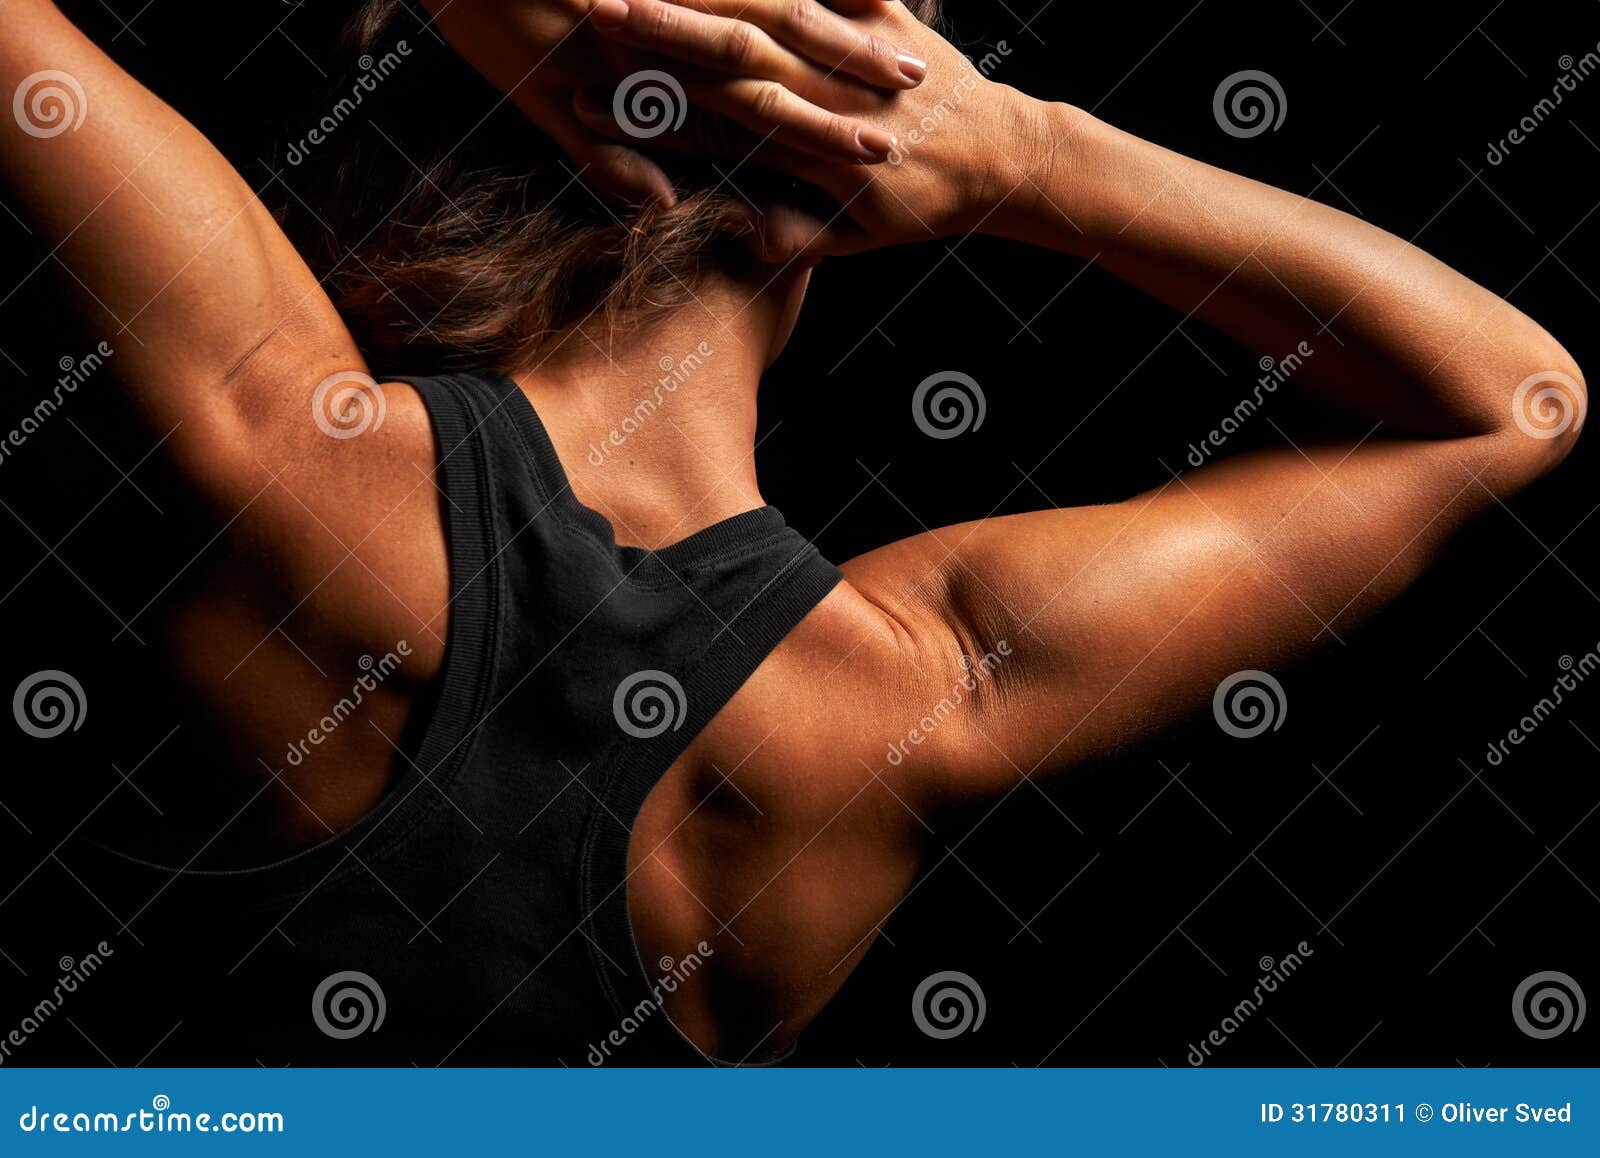 14,617 Back Woman Muscular Stock Photos - Free & Royalty-Free